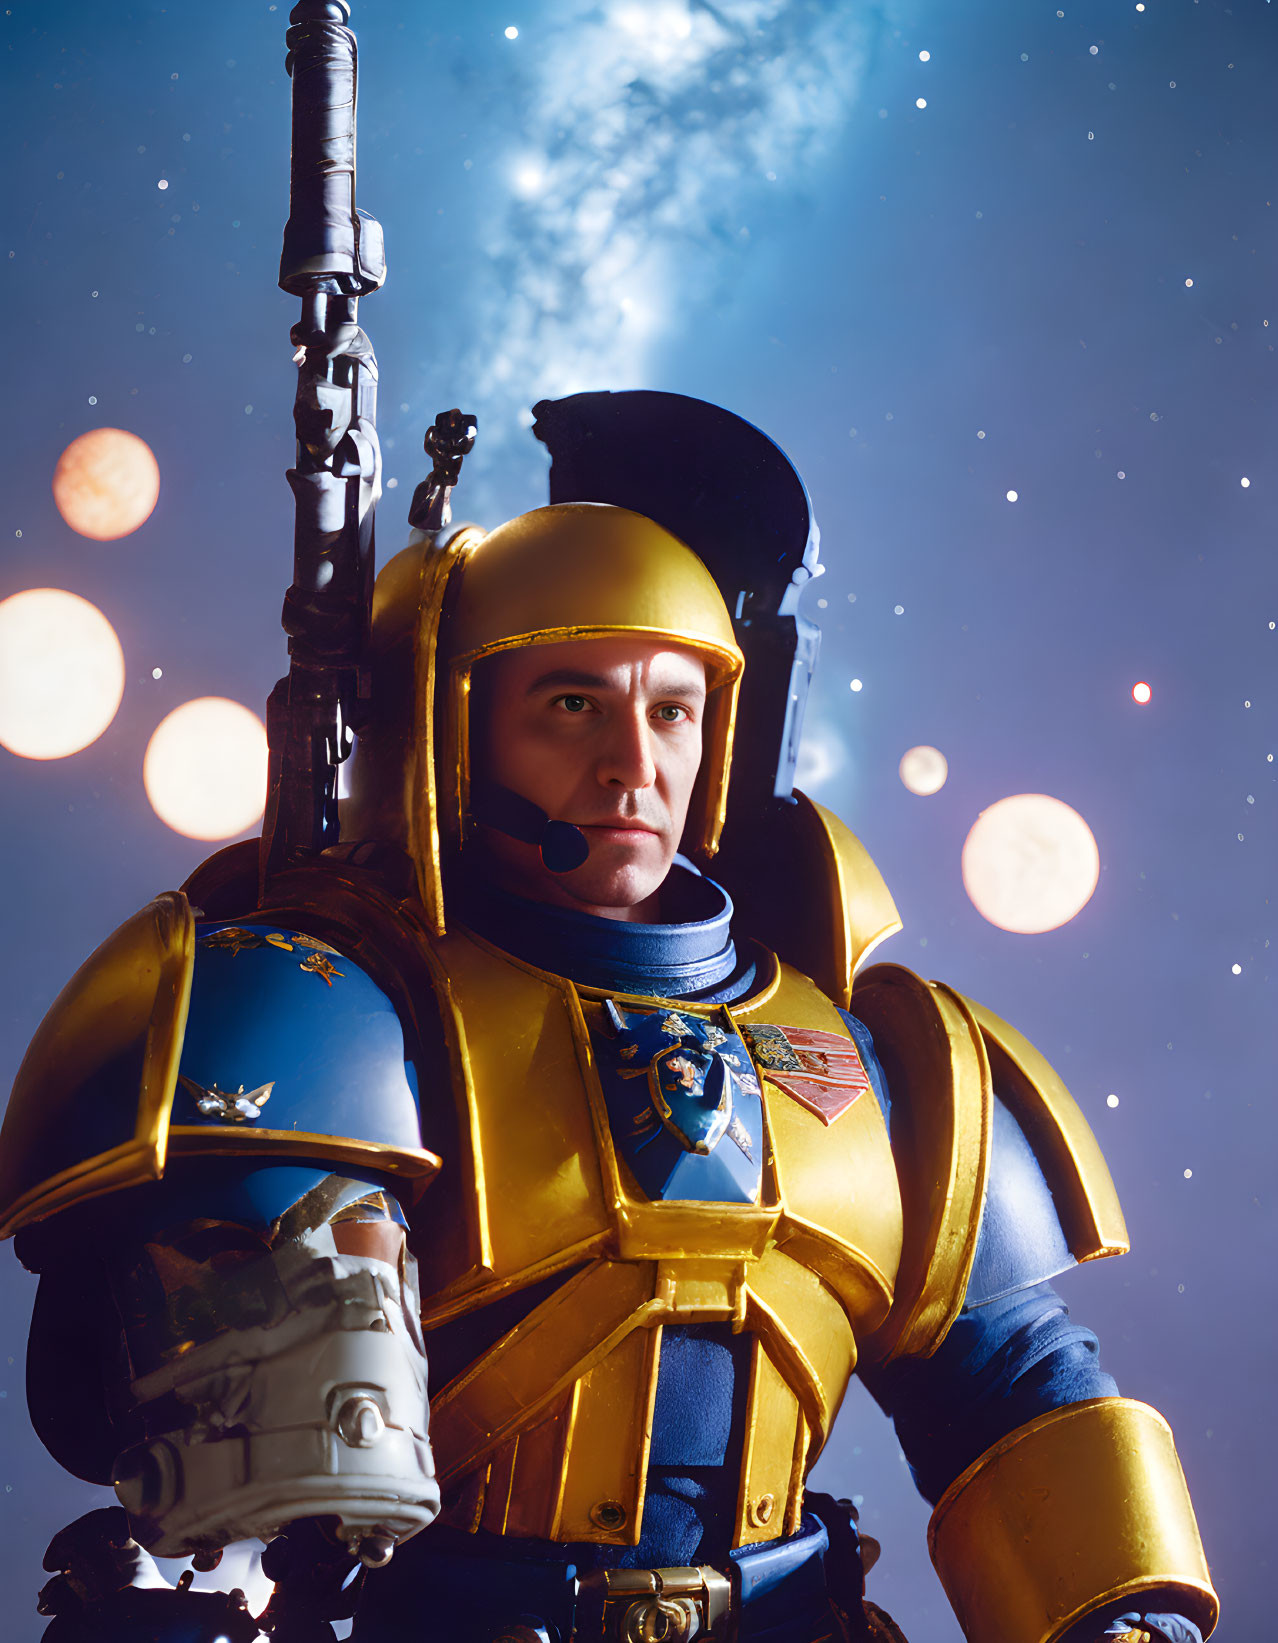 Detailed Blue and Gold Space Marine Armor Against Starry Background